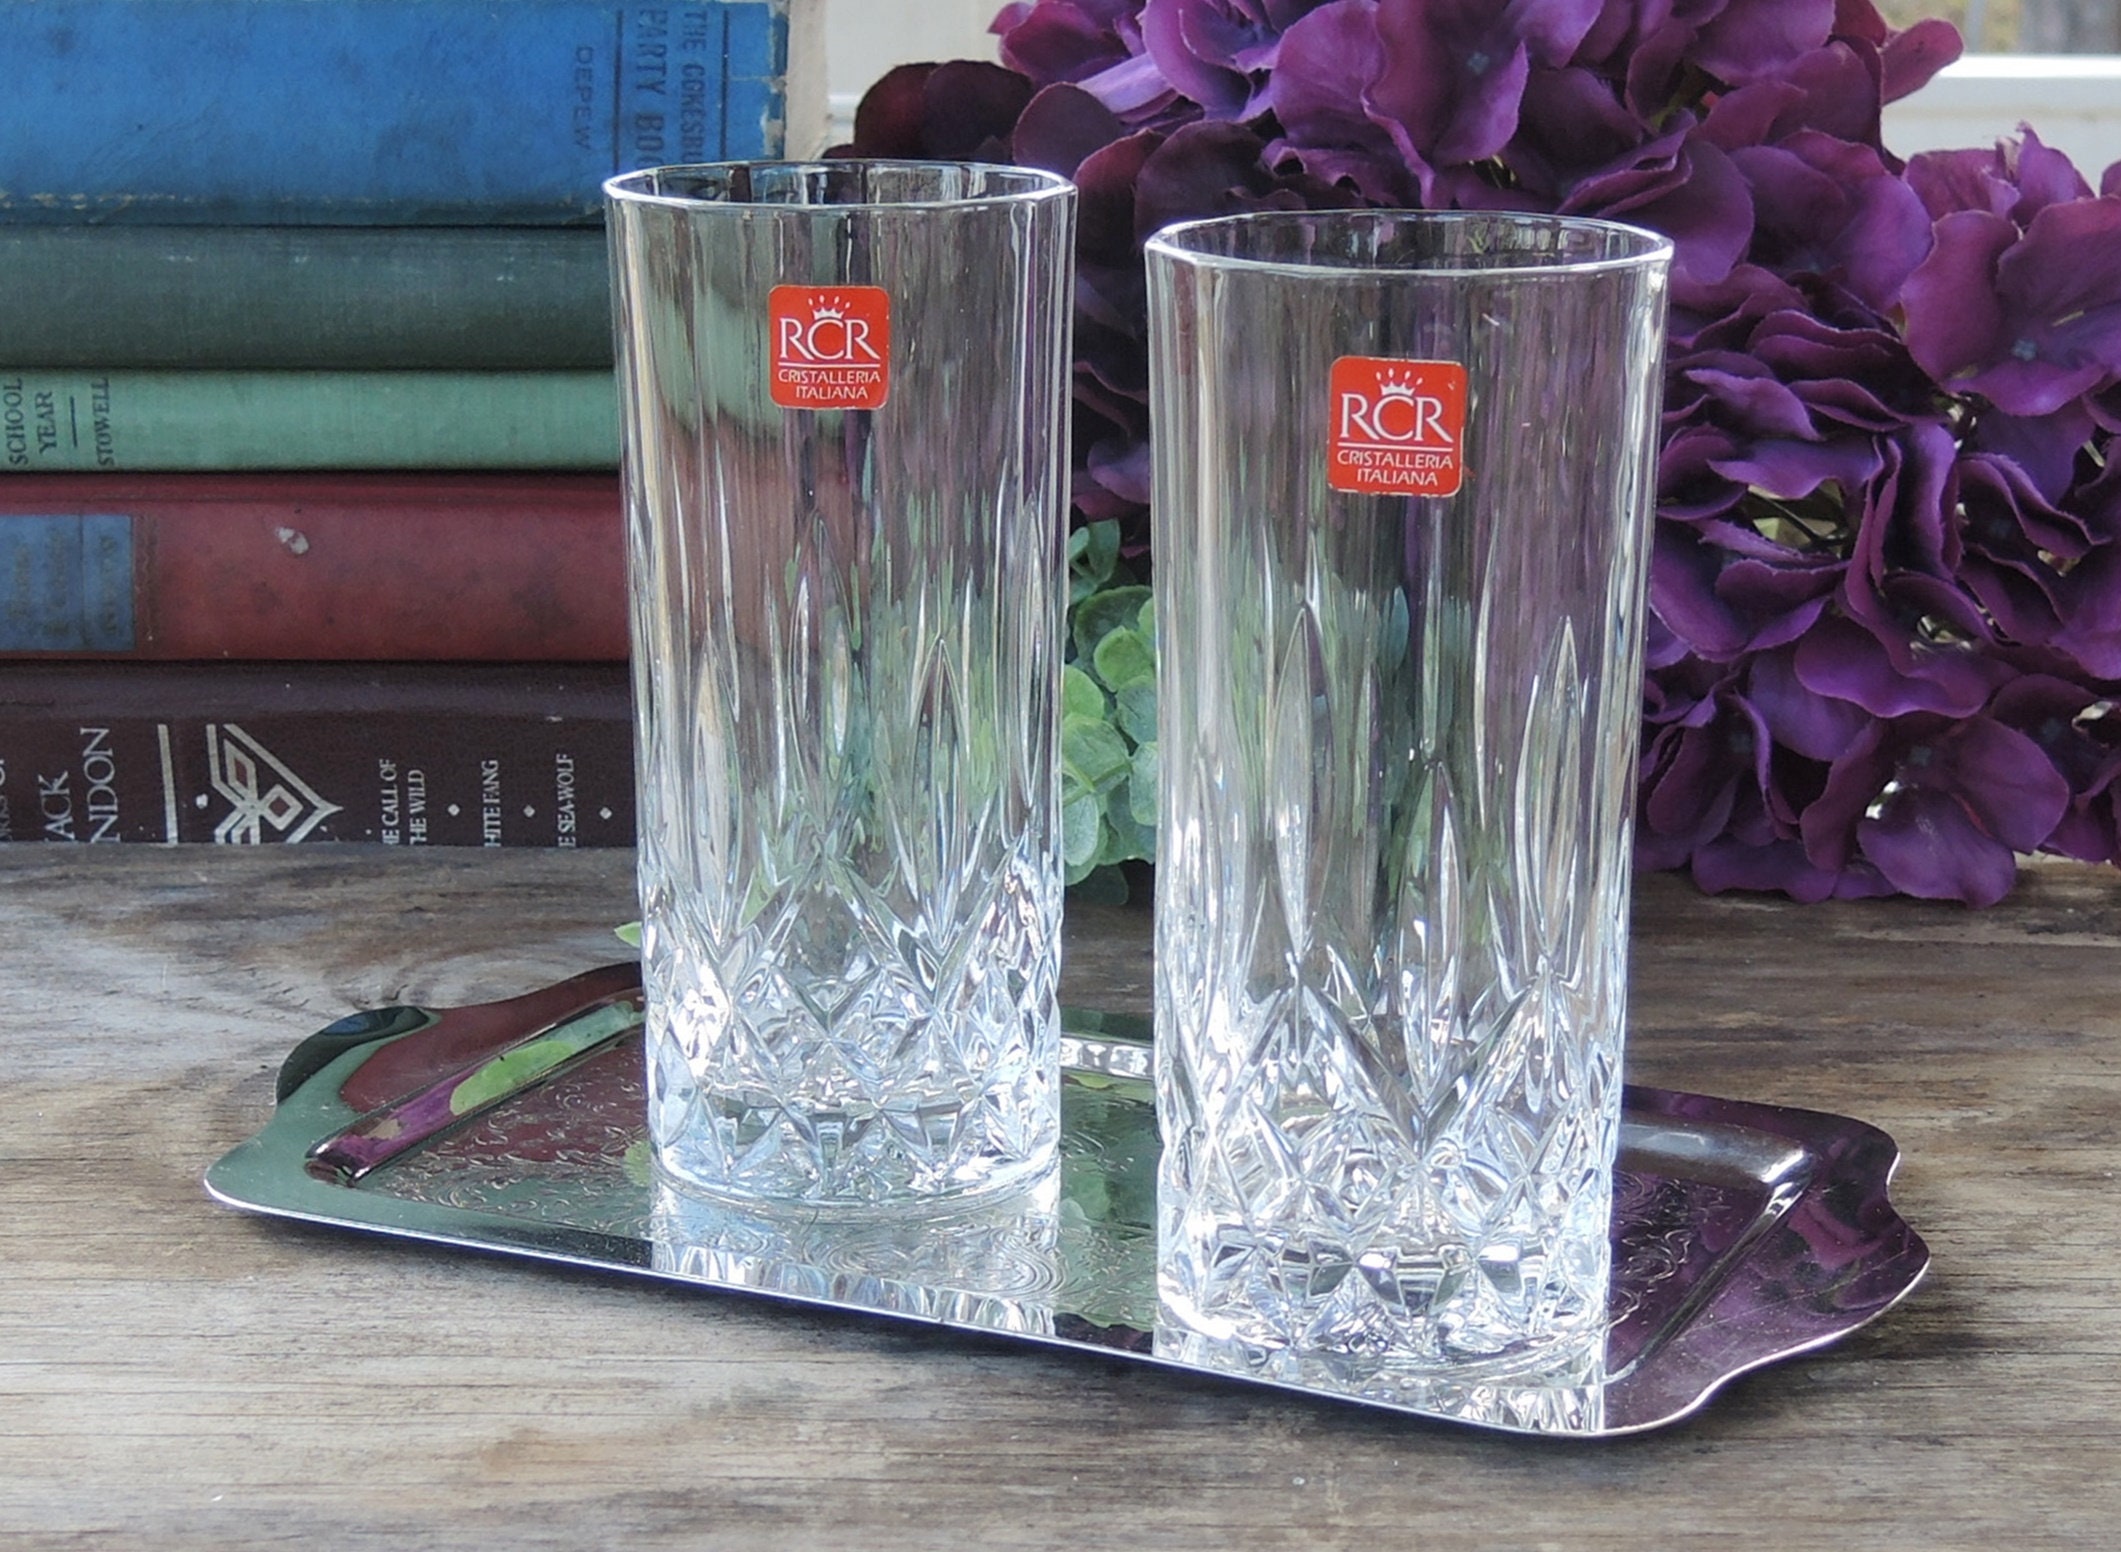 RCR Cristalleria Italiana Crystal Highball Glass, Tumbler, Drinking Glass  Etched